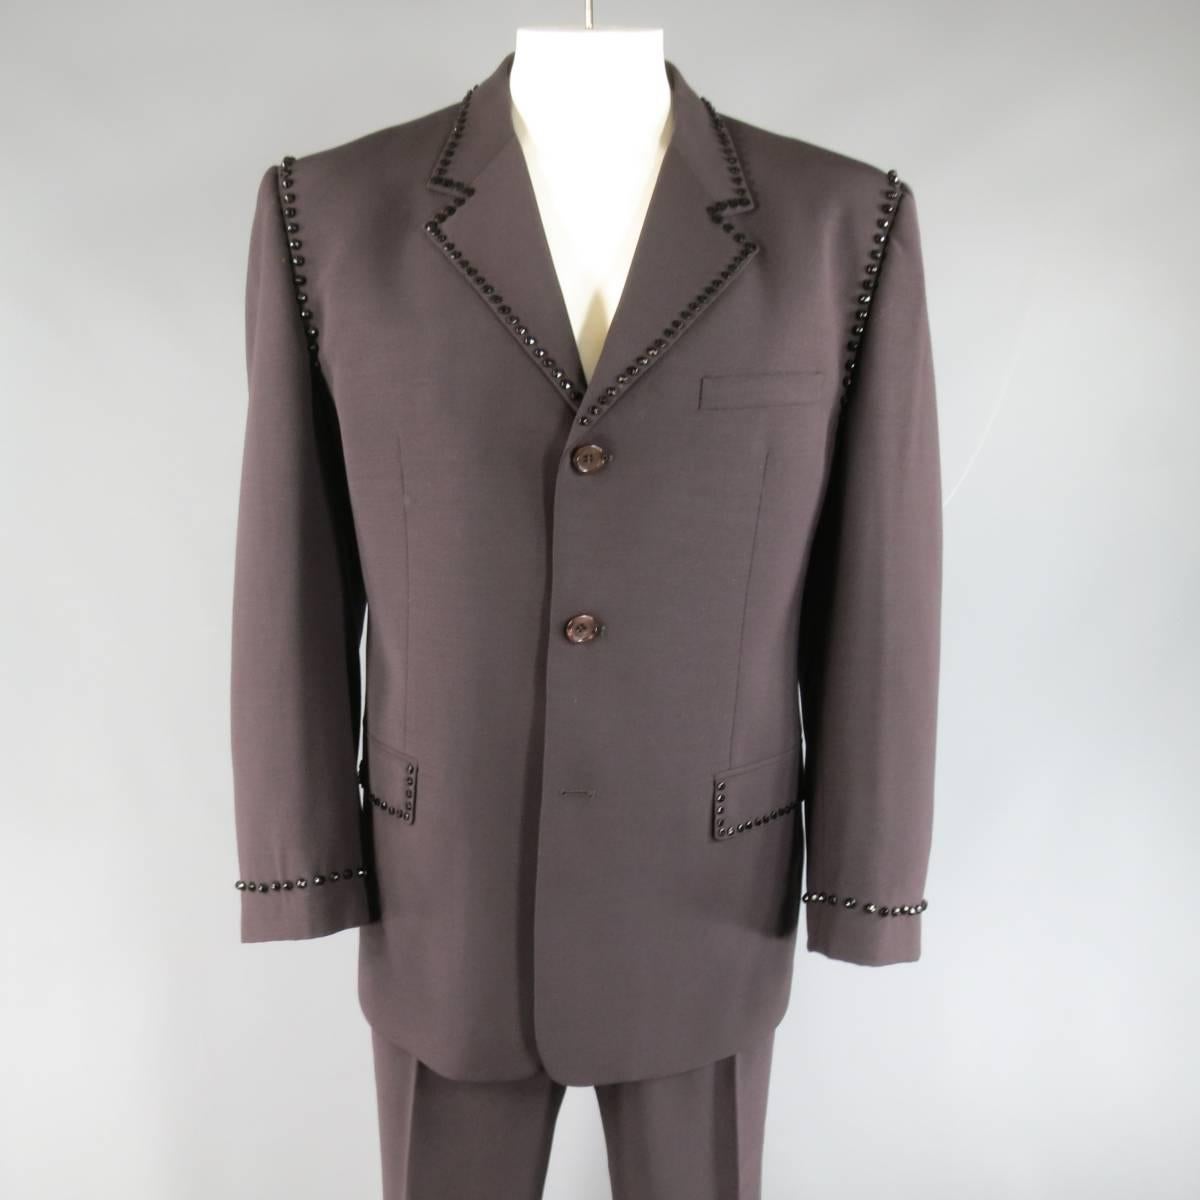 This rare vintage GIANNI VERSACE (Red Label) suit comes in a light weight muted eggplant taupe color wool and includes an oversized three button sport coat with a notch lapel, double flap pockets, single vented back, and black crystal like beaded